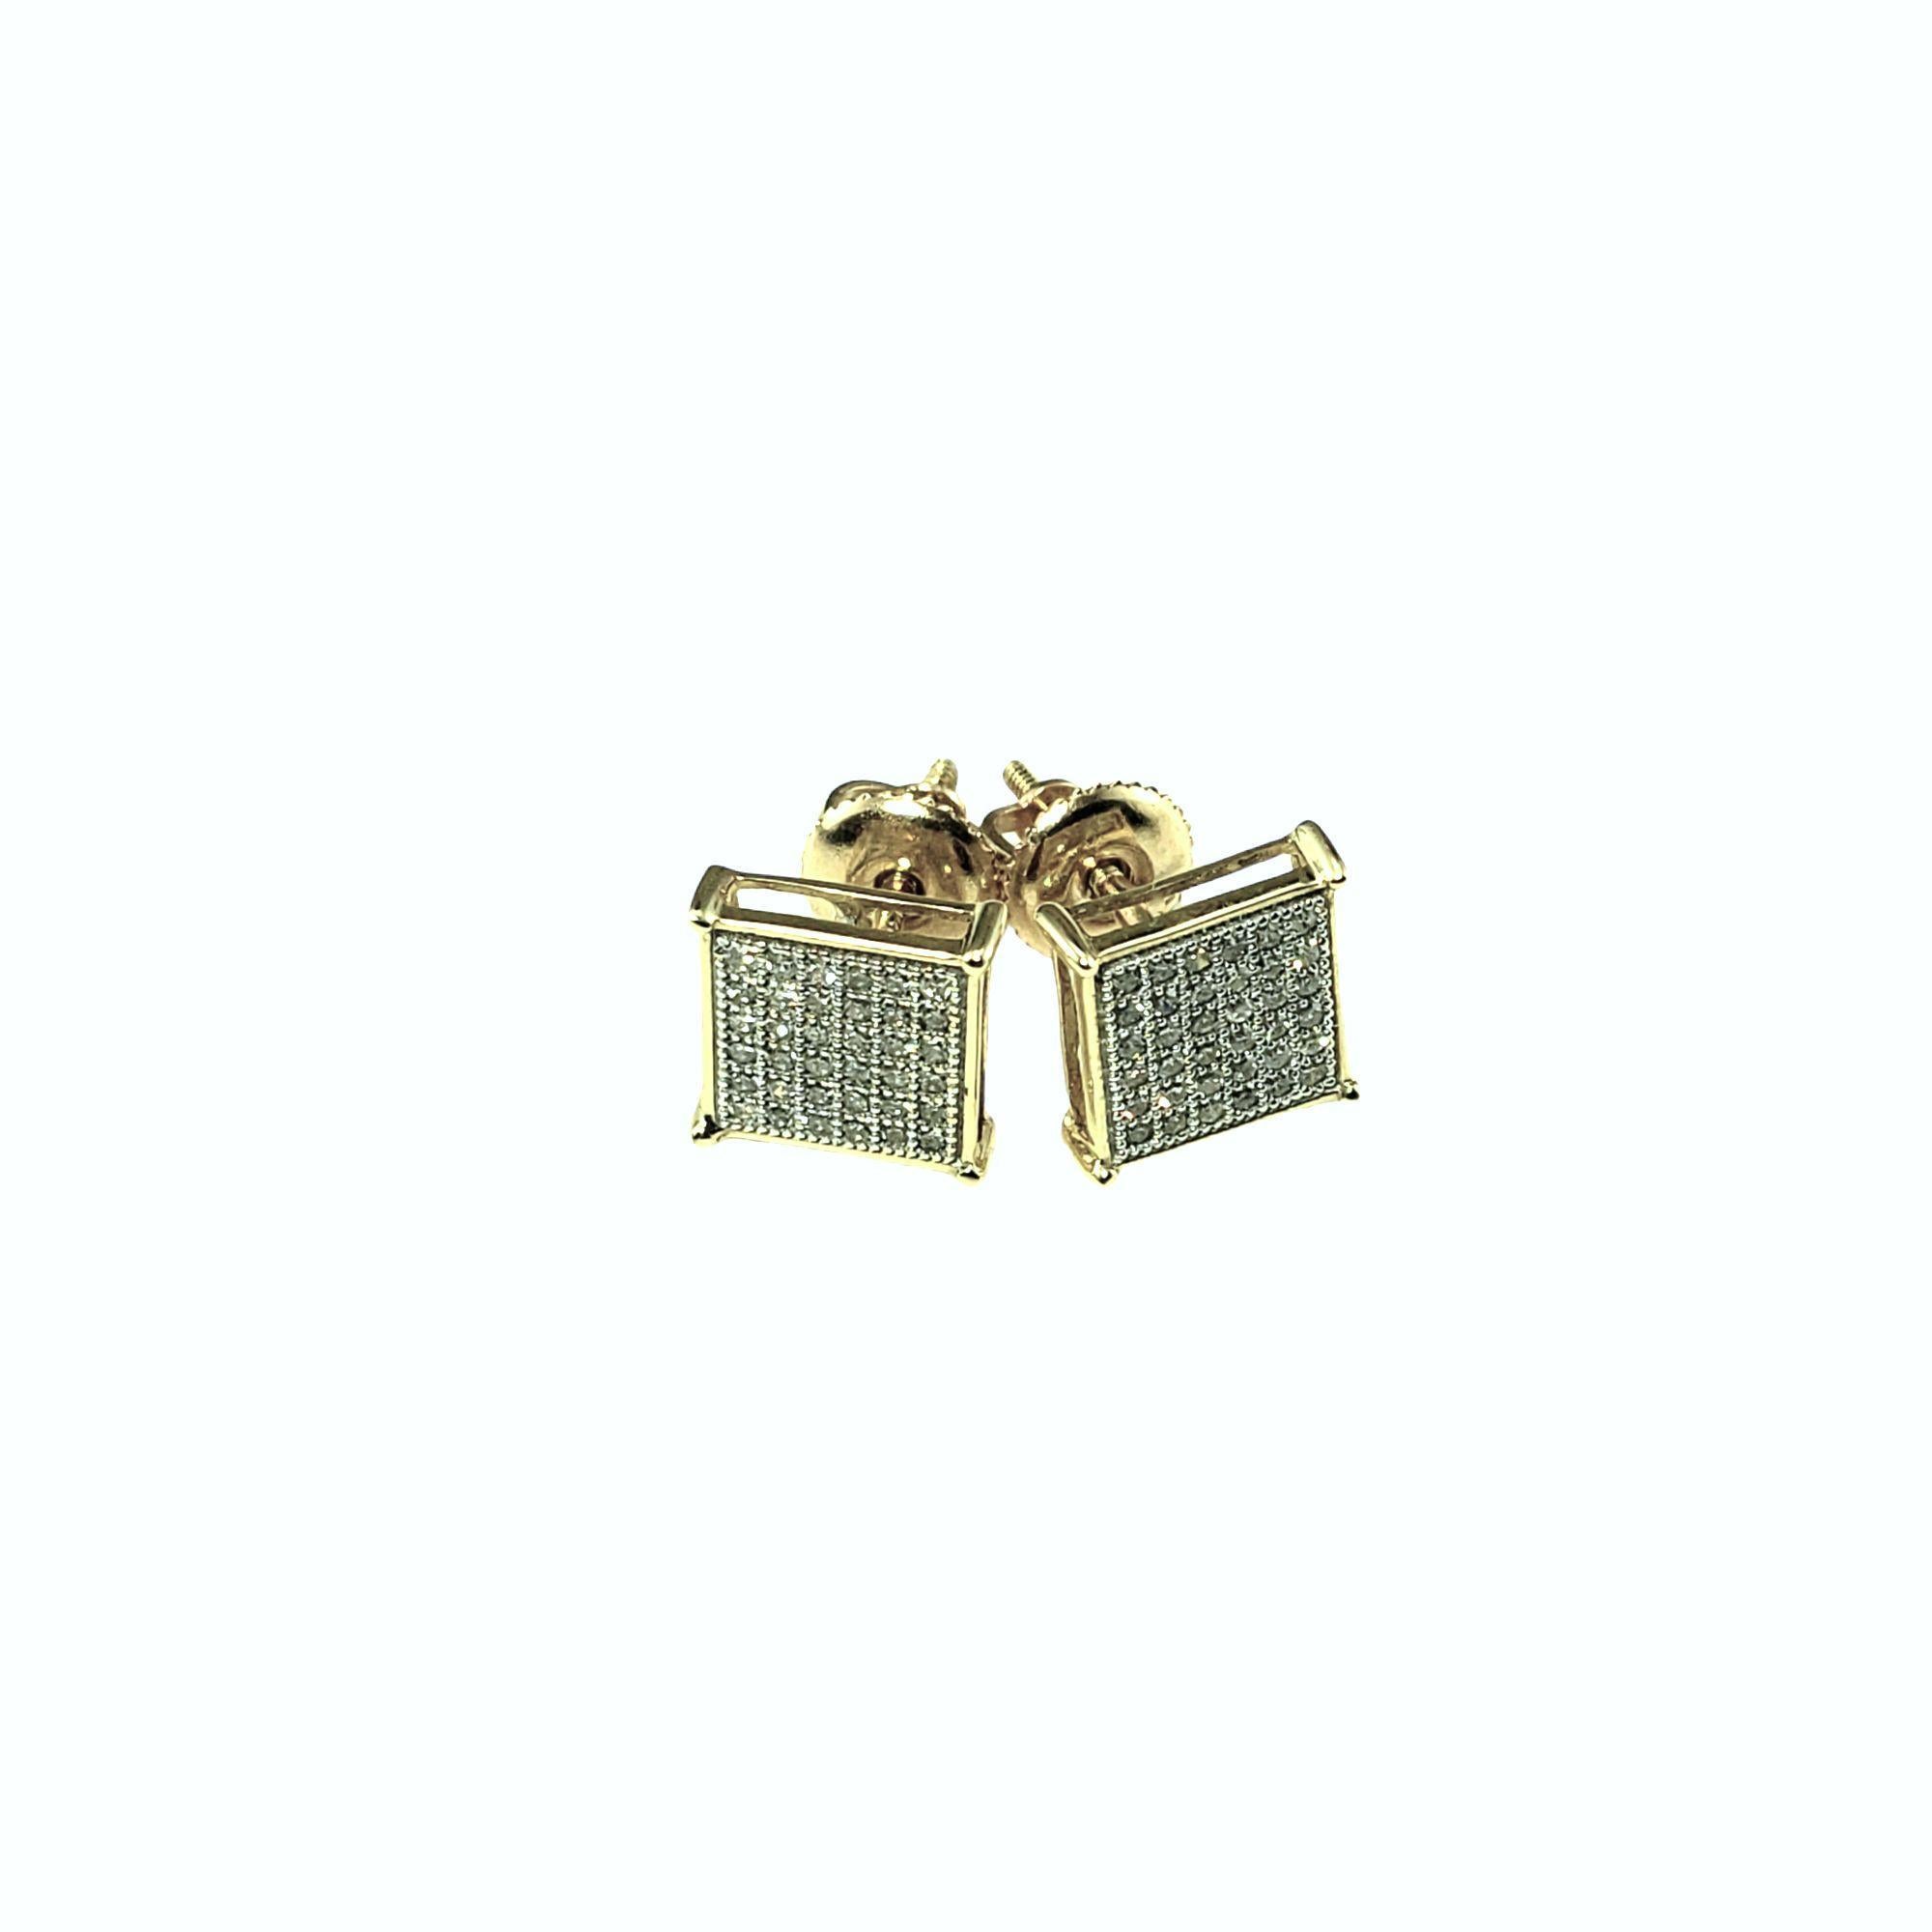 10 Karat Yellow Gold and Diamond Earrings-

These sparkling stud earrings each feature 36 round single cut diamonds set in classic 10K gold. Screw back closures.

Approximate total diamond weight: .24 ct.

Diamond clarity: SI1-I1

Diamond color: